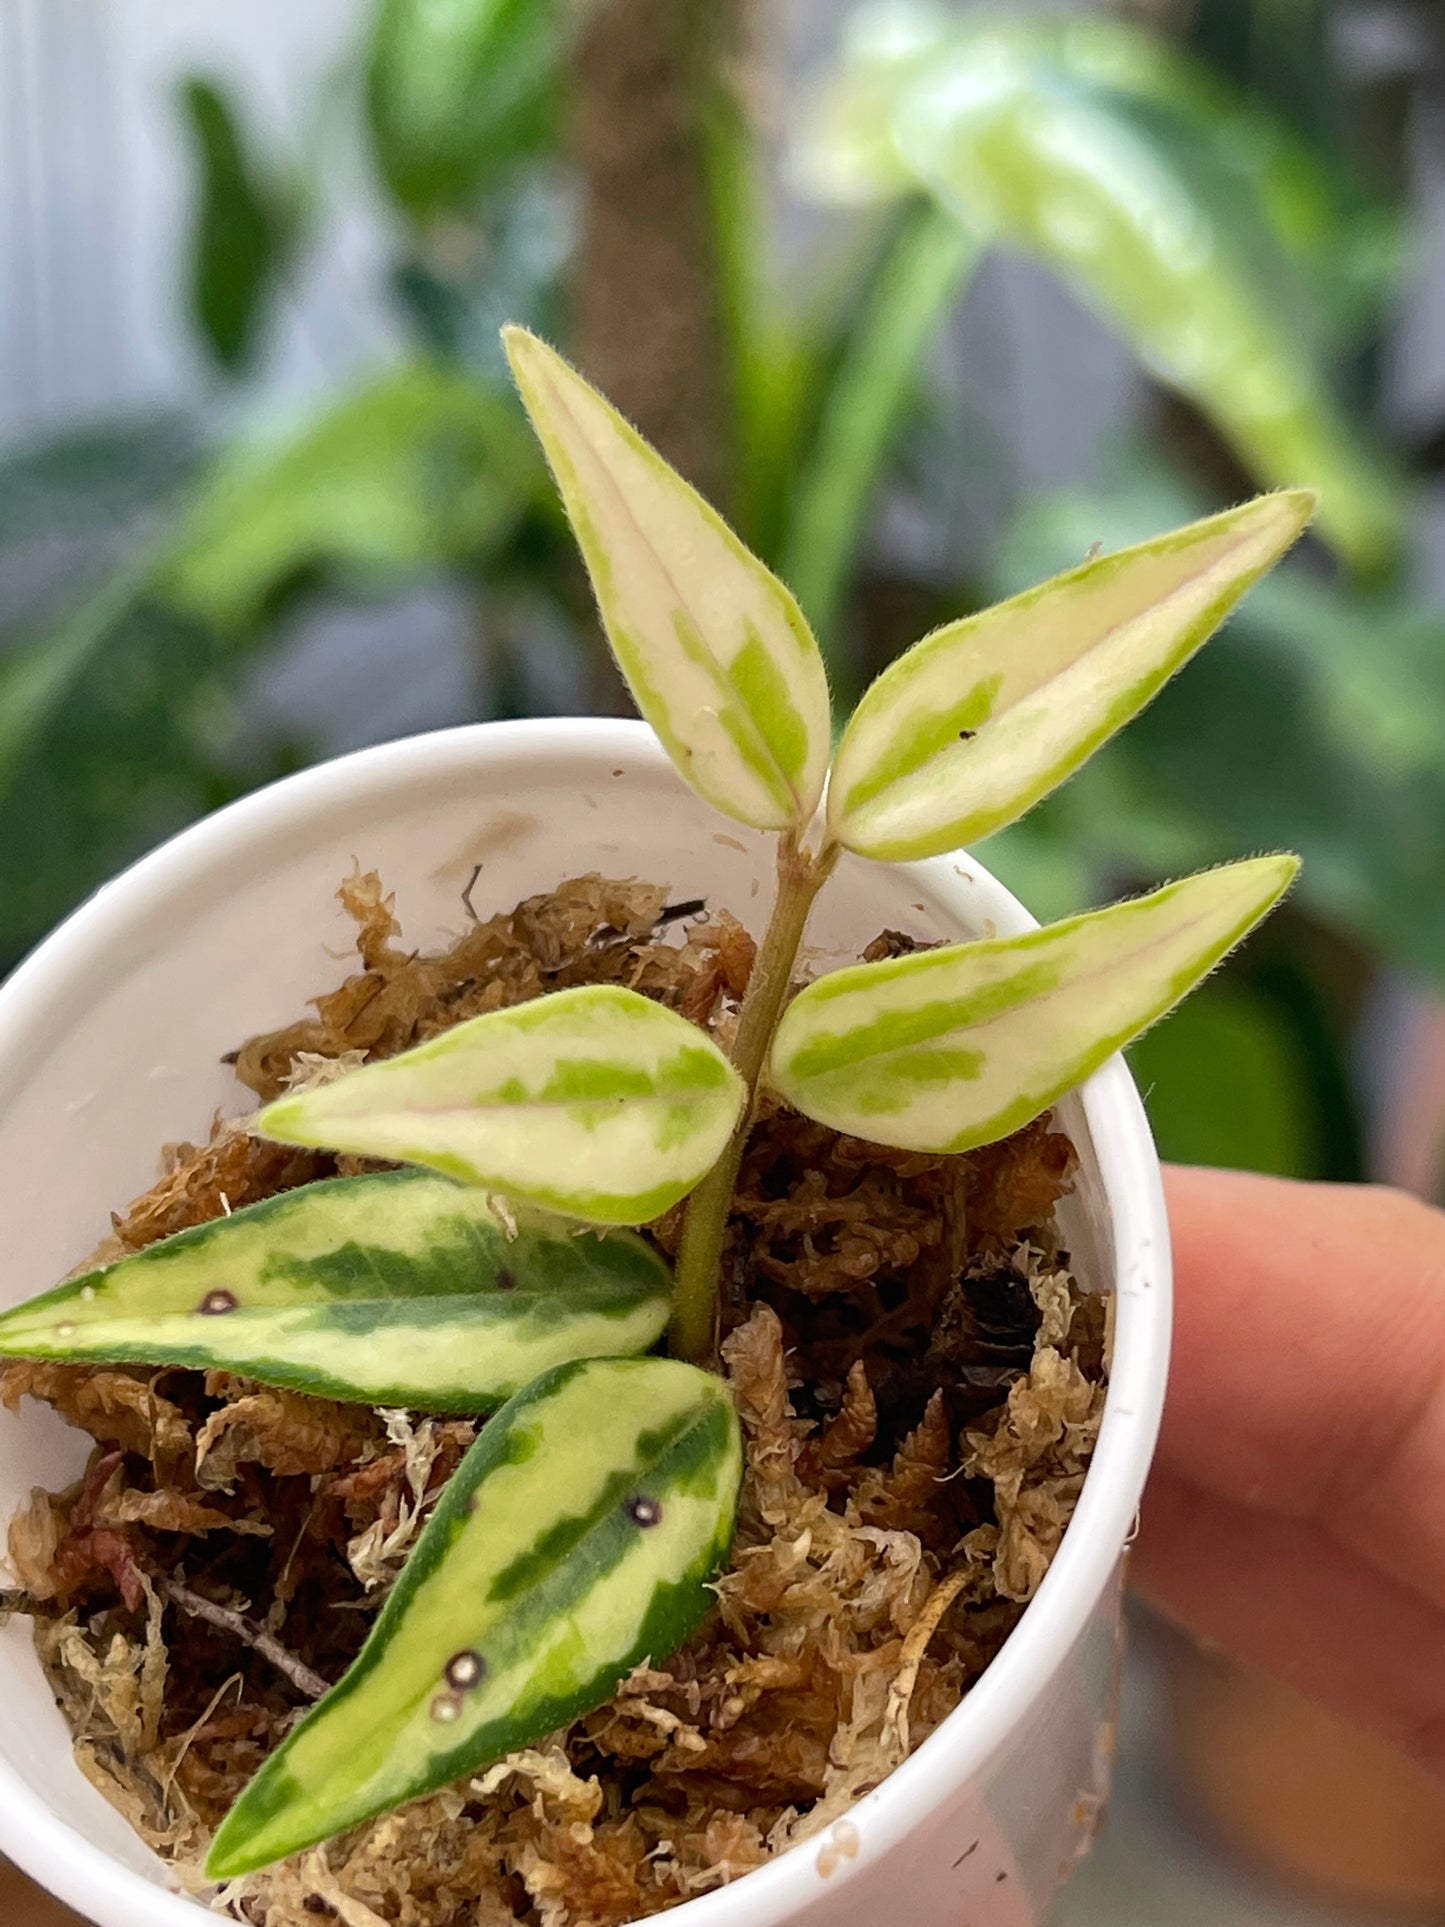 Private sale: hoya luis bois rooting cutting